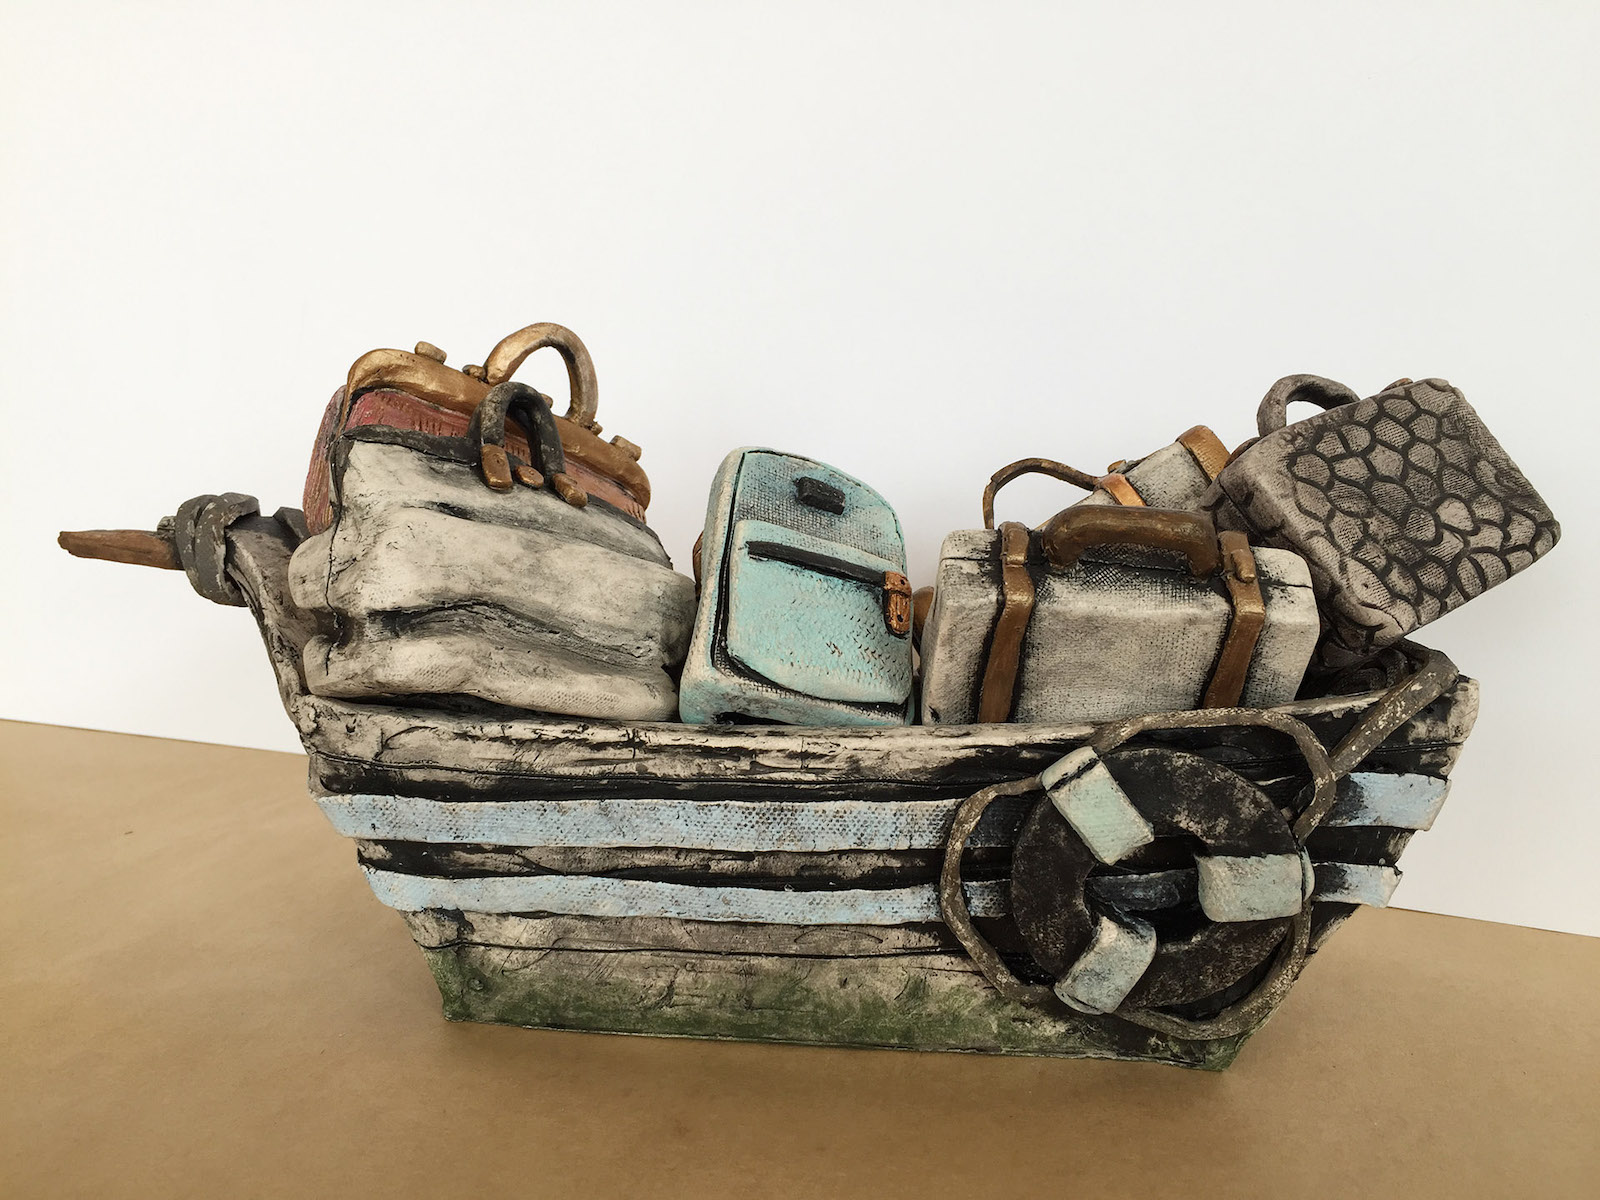 Ceramic Sculpture of a Boat with Luggage by Melinda Laz